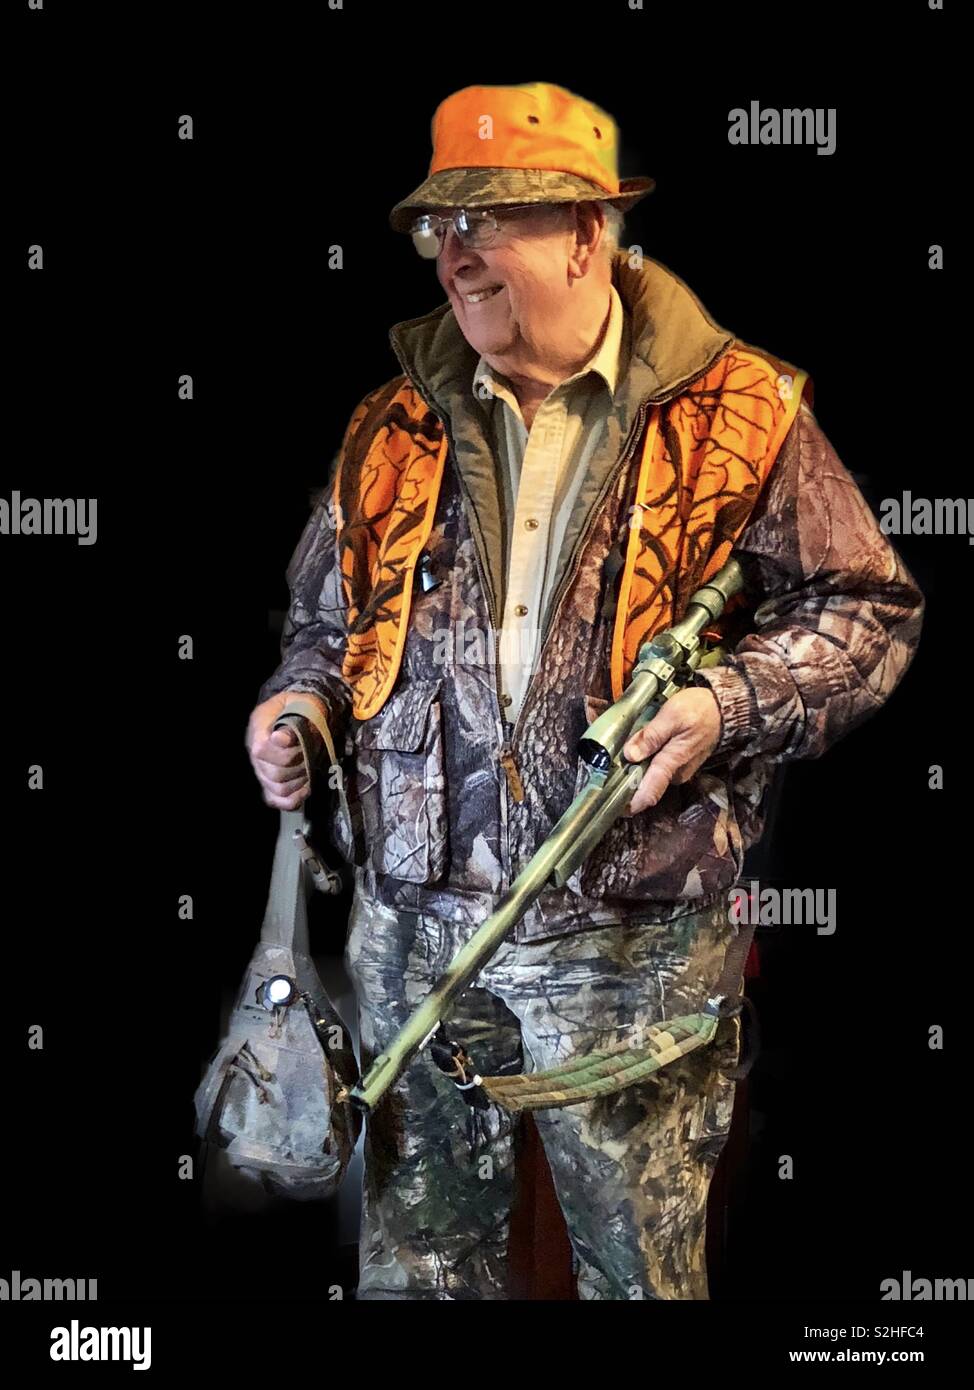 An excited hunter as he prepares for his day. Stock Photo